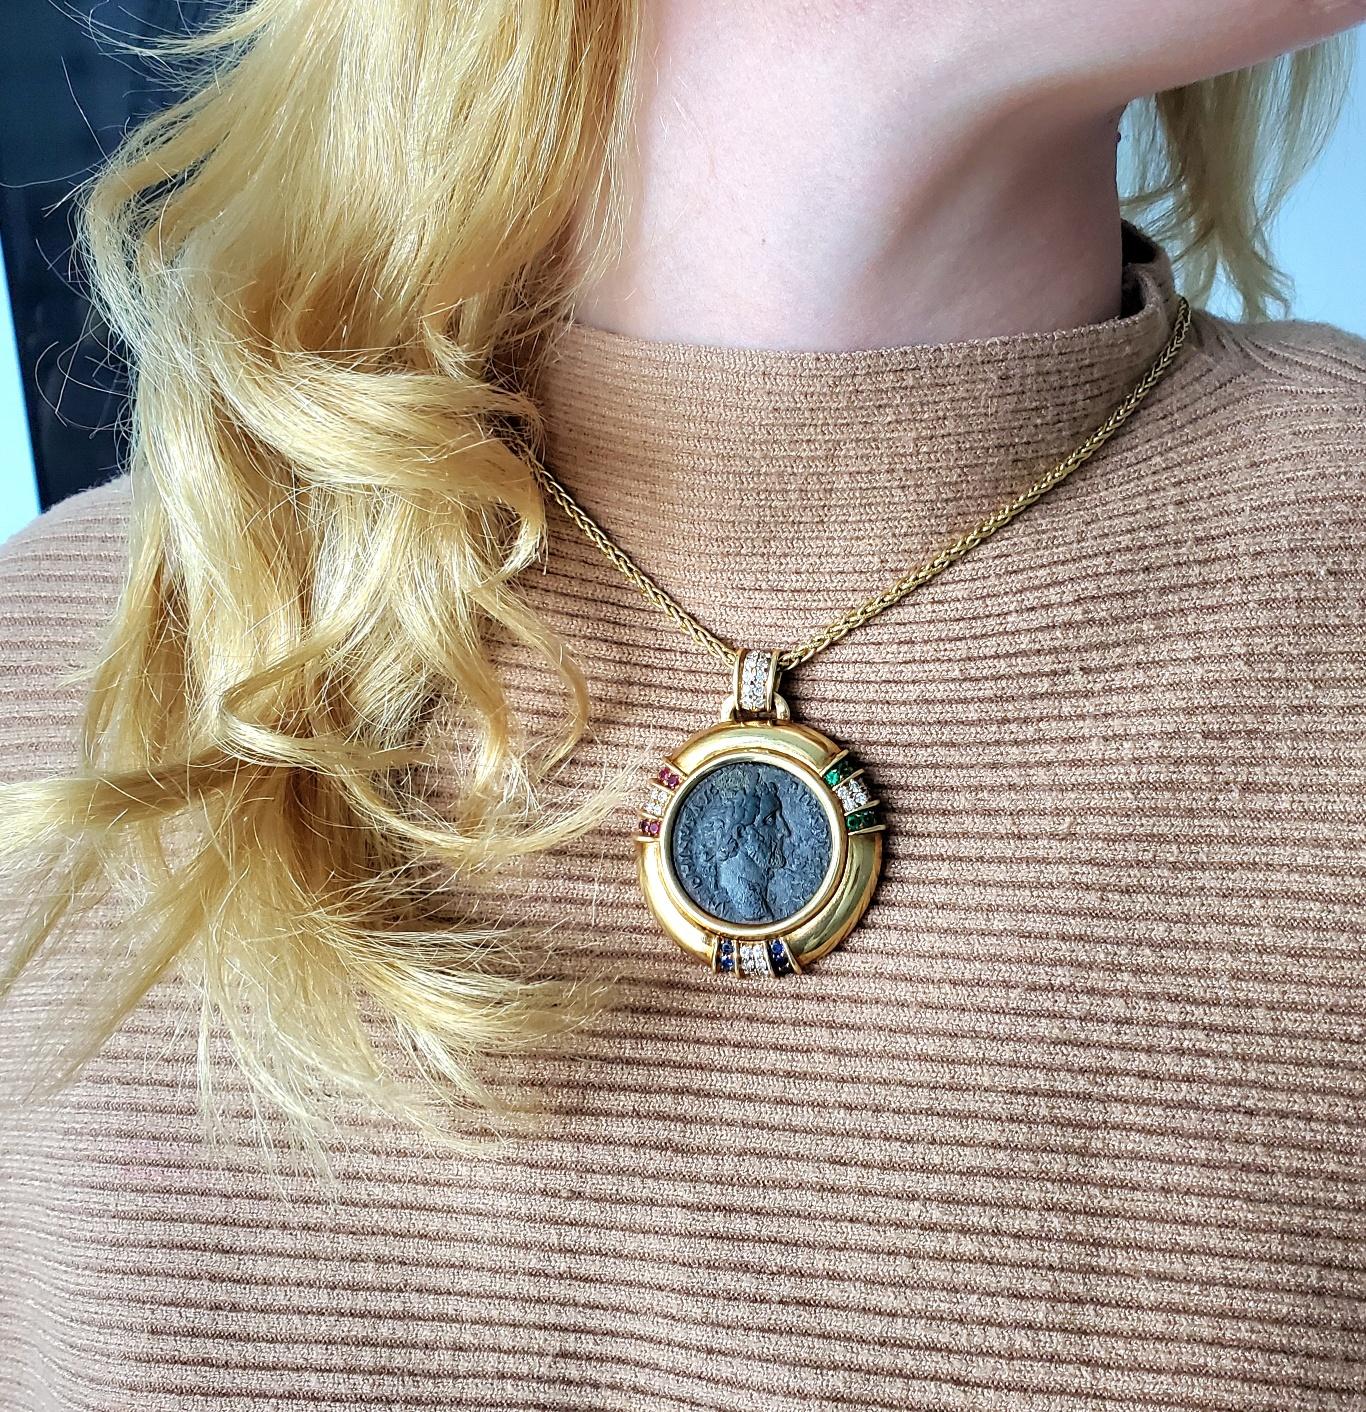 Ancient Roman coin pendant designed by Jean Paris.

An oversized pendant mounted with an ancient Roman bronze coin, created in Paris France by Jean Paris, back in the late 20th century. This beautiful pendant has been crafted with classic patterns